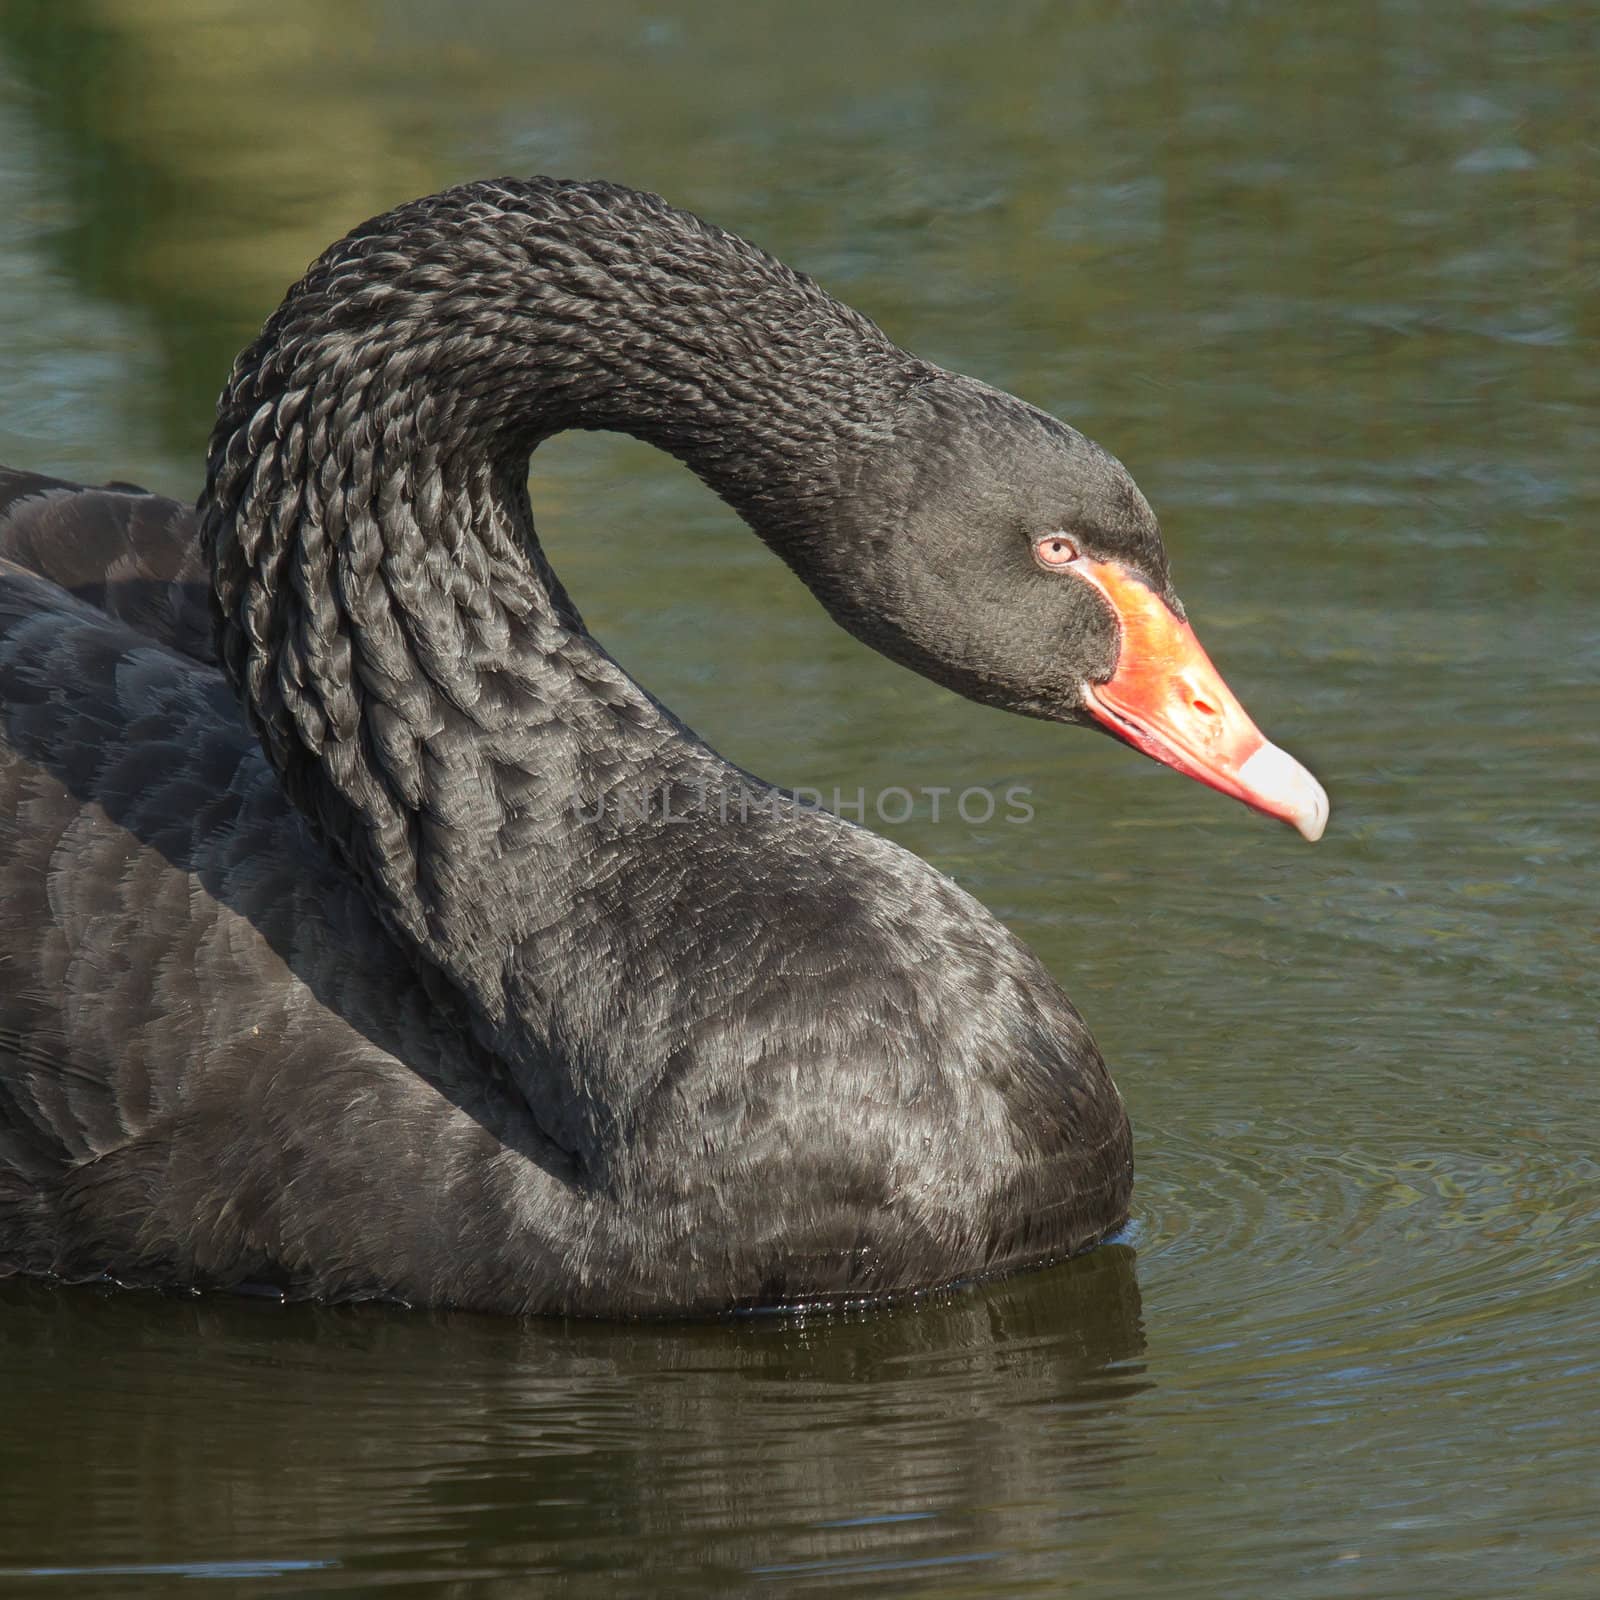 A black swan is swimming by michaklootwijk